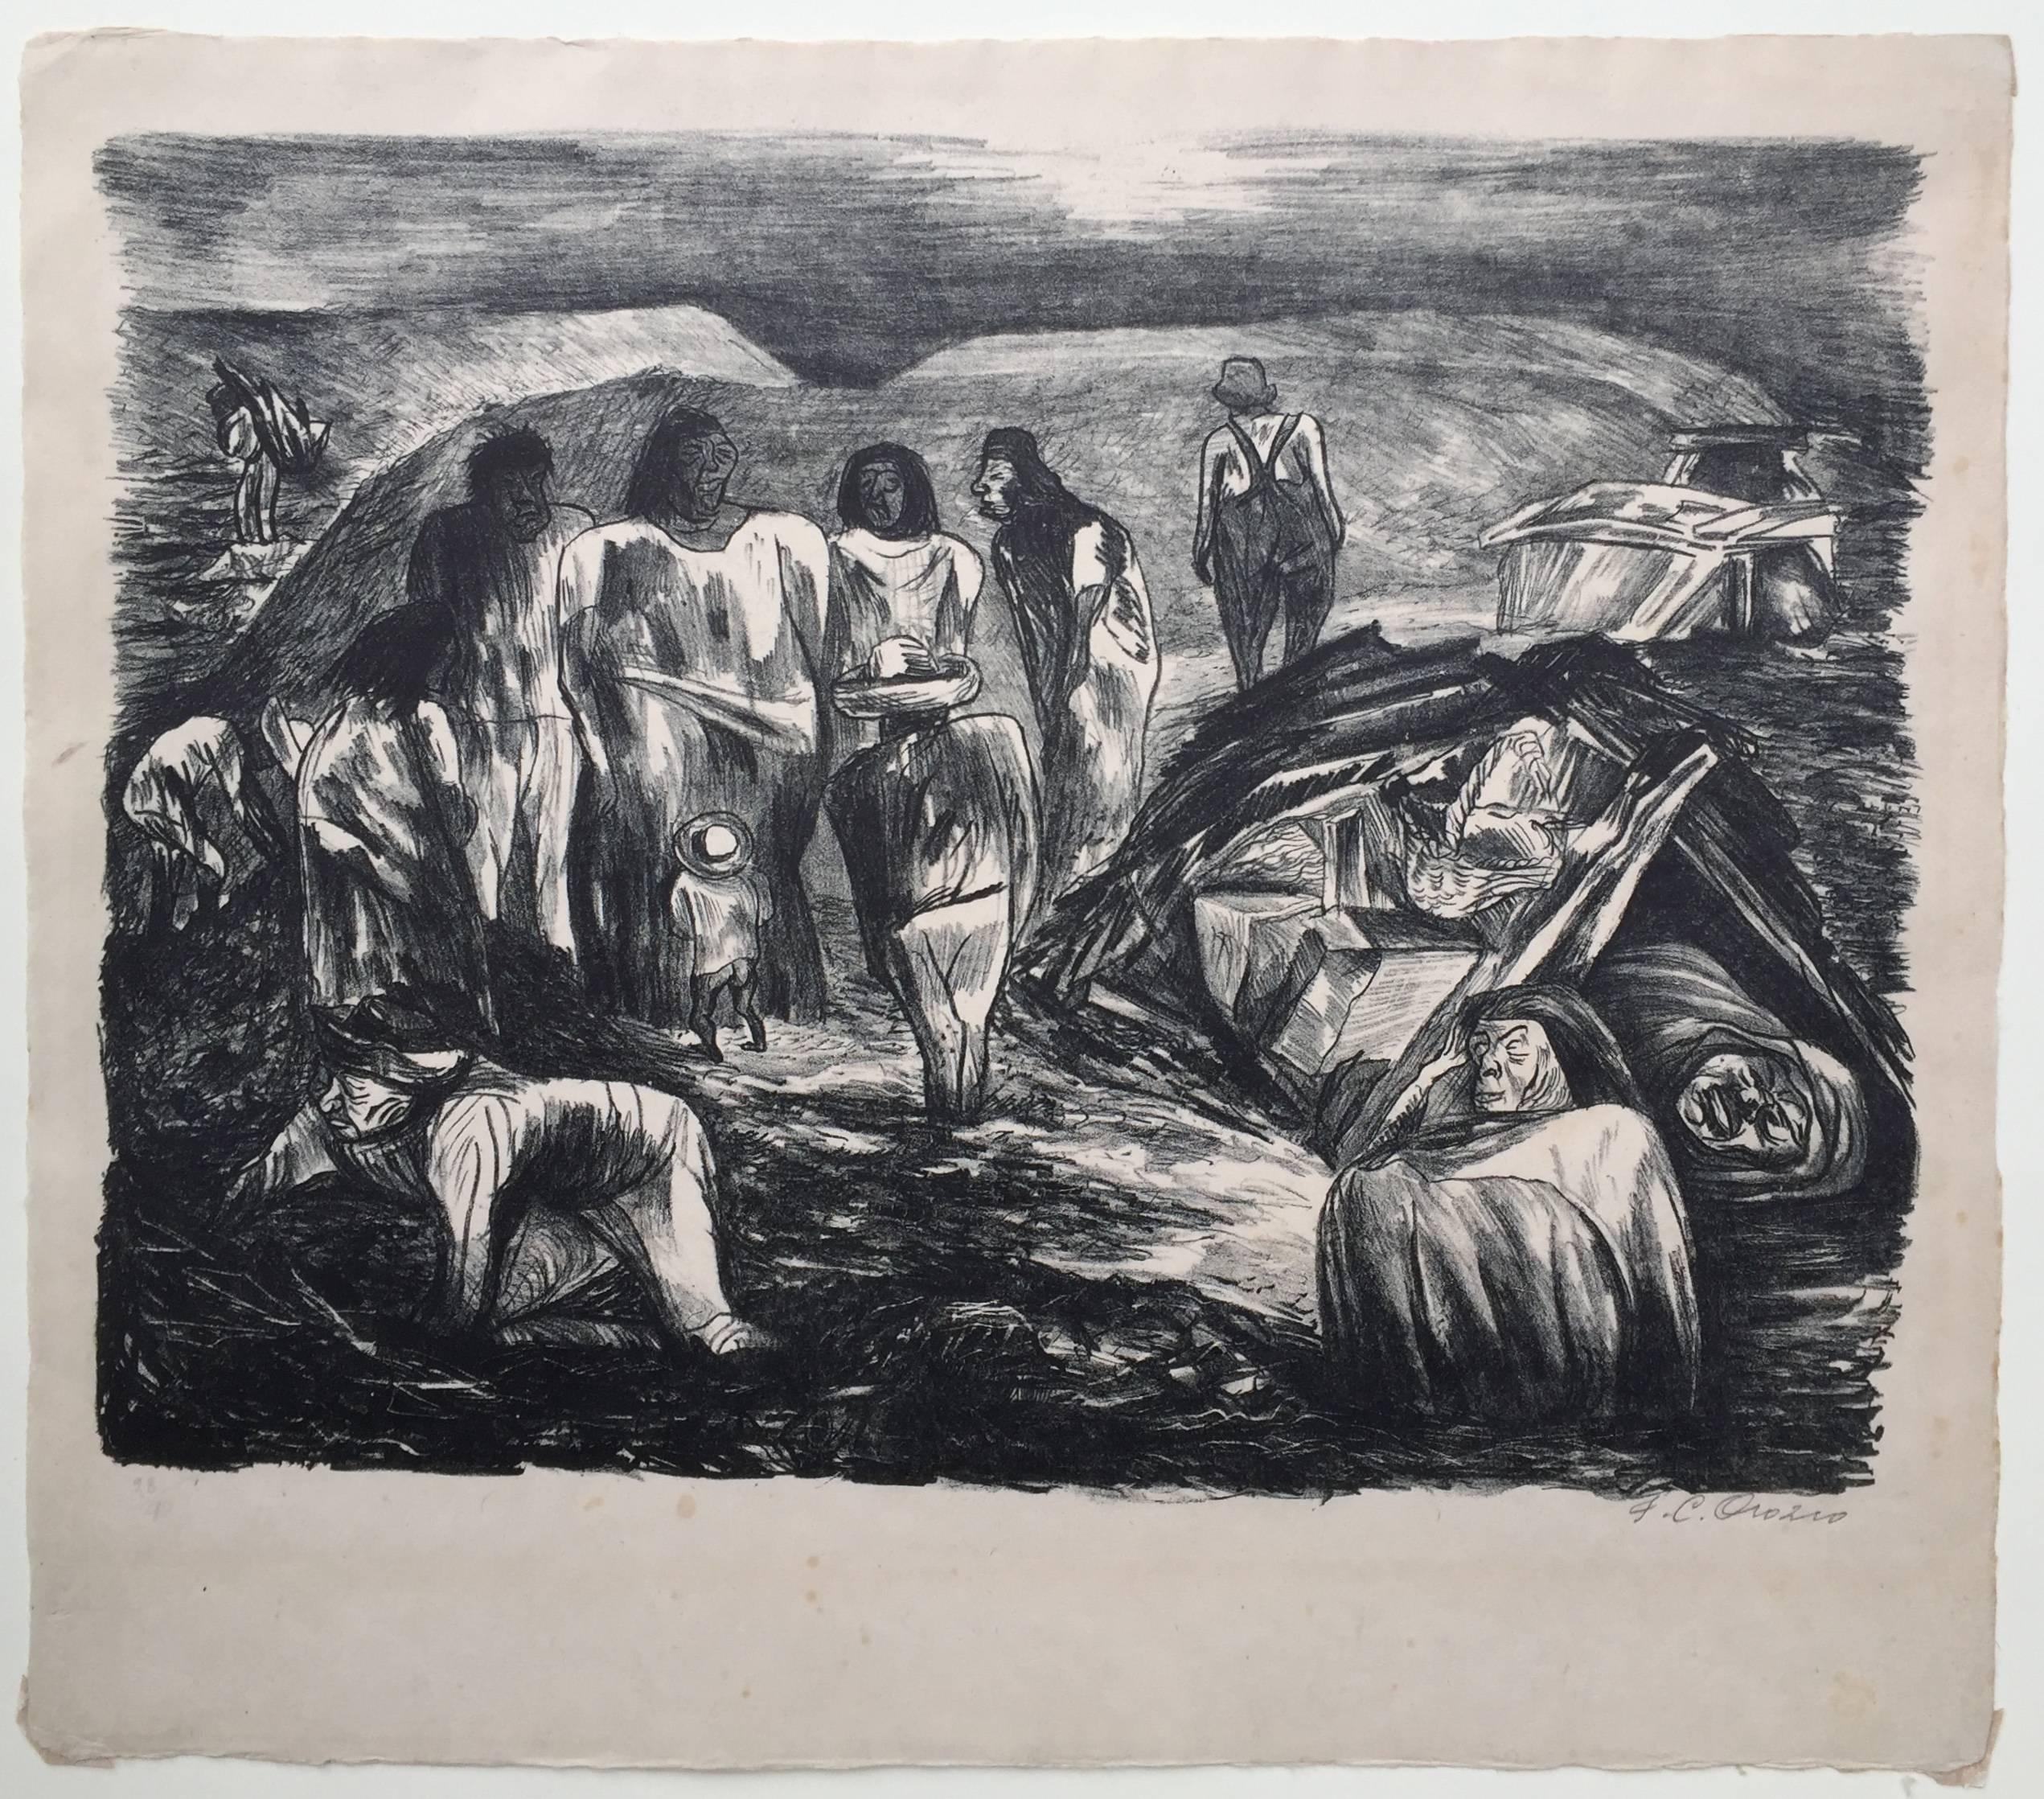 PROLETARIANS - Print by Jose Clemente Orozco